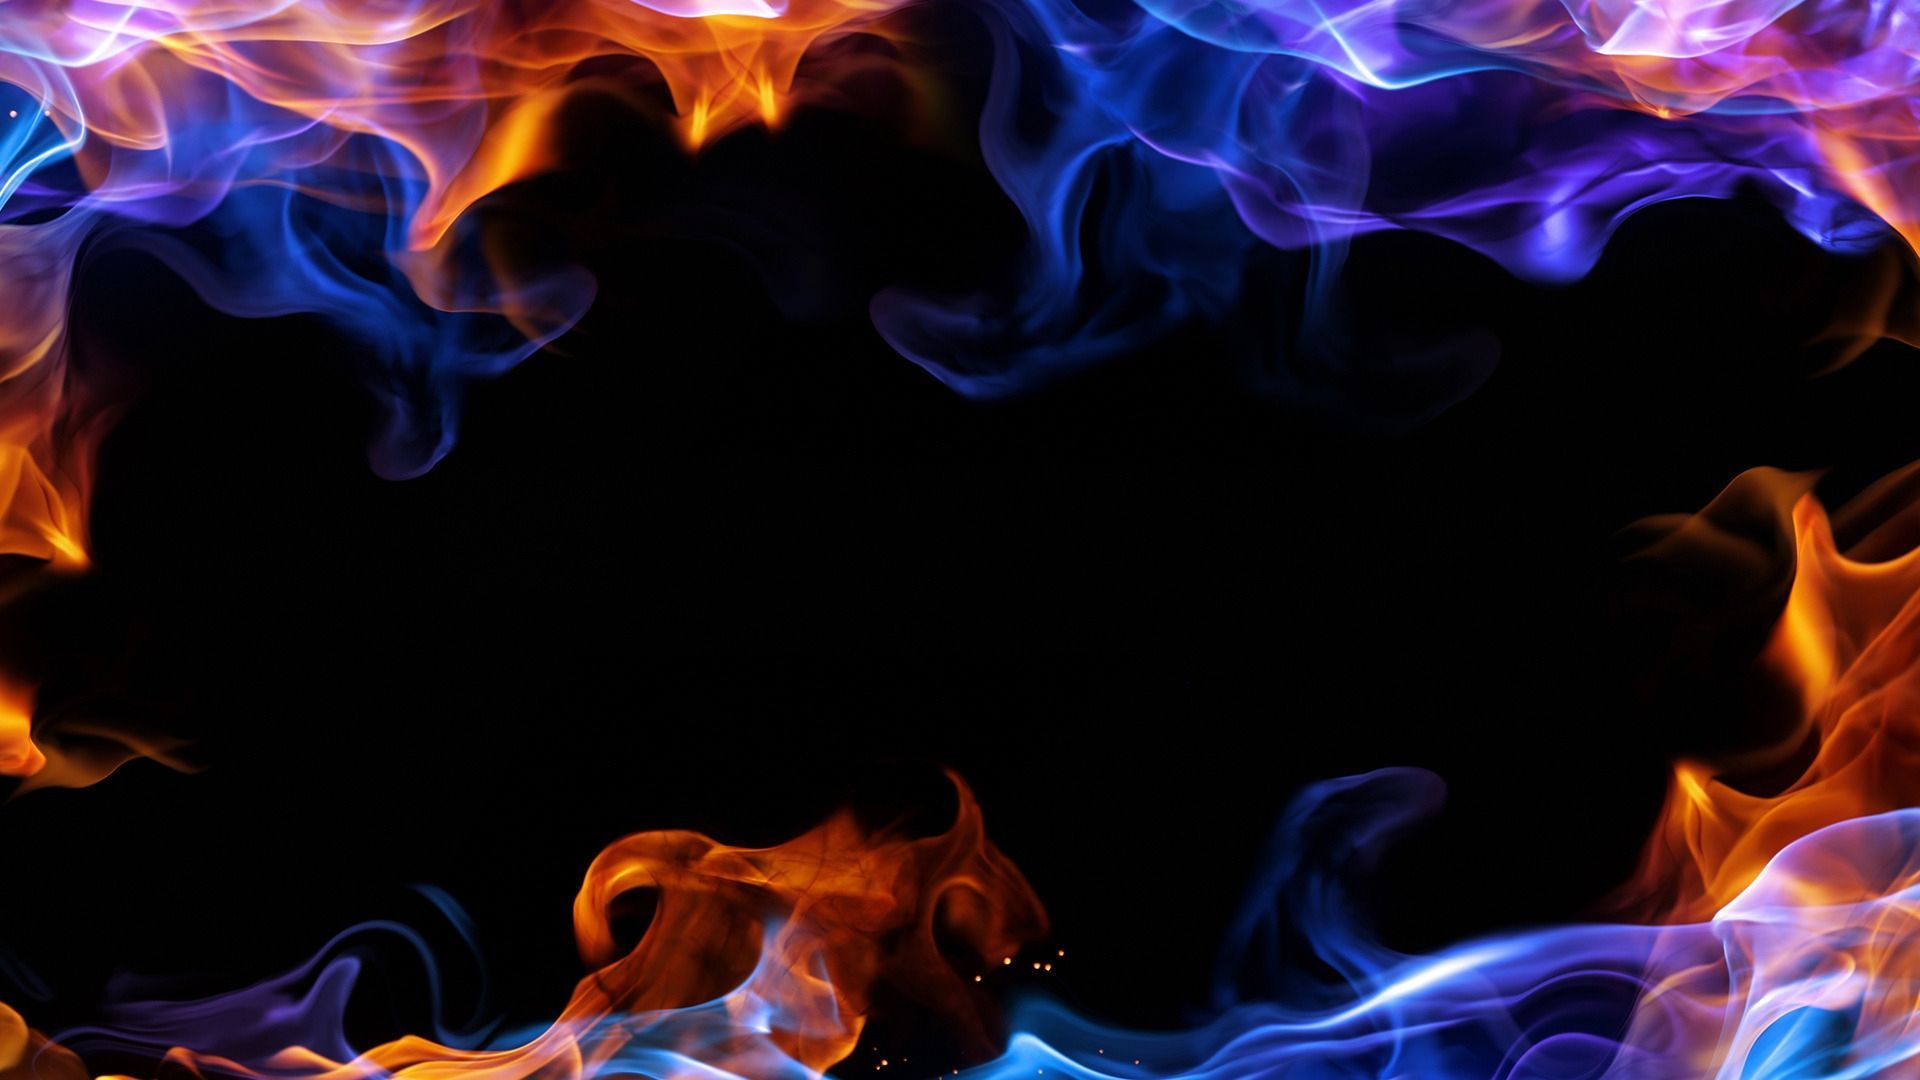 Download Wallpaper 1920x1080 Smoke, Background, Play of light